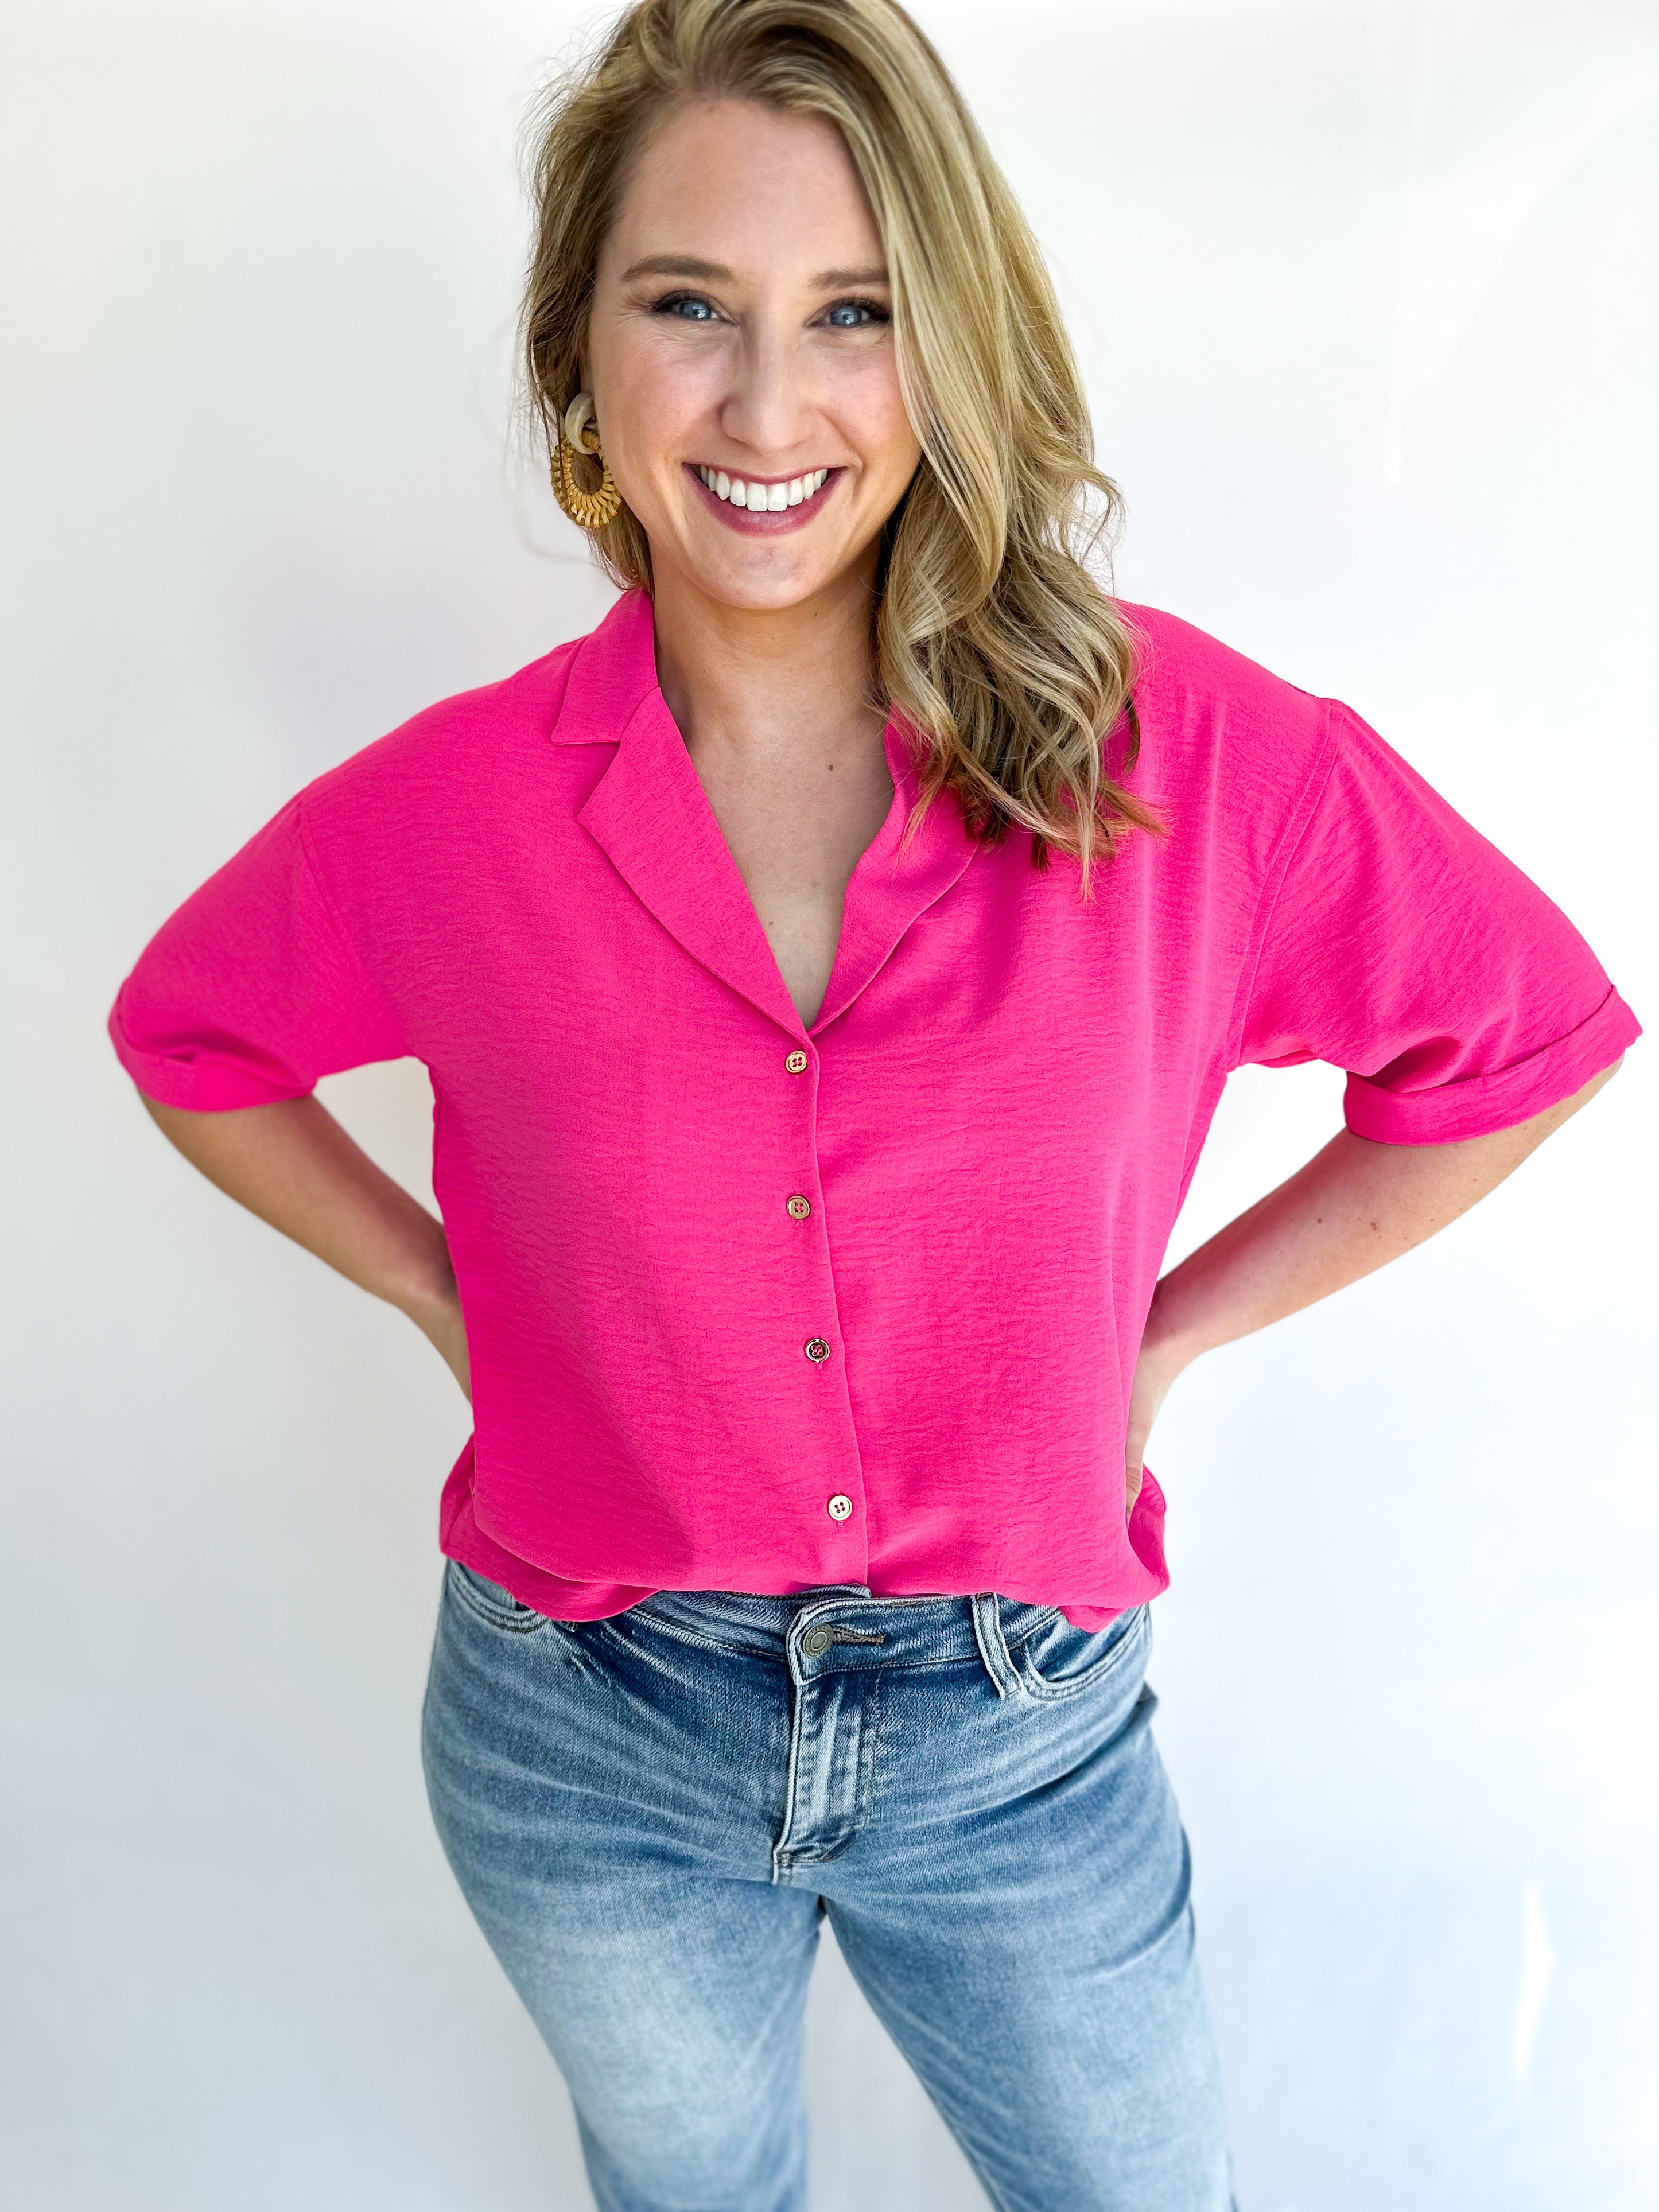 Throw On And Go Blouse - Pink-200 Fashion Blouses-ENTRO-July & June Women's Fashion Boutique Located in San Antonio, Texas